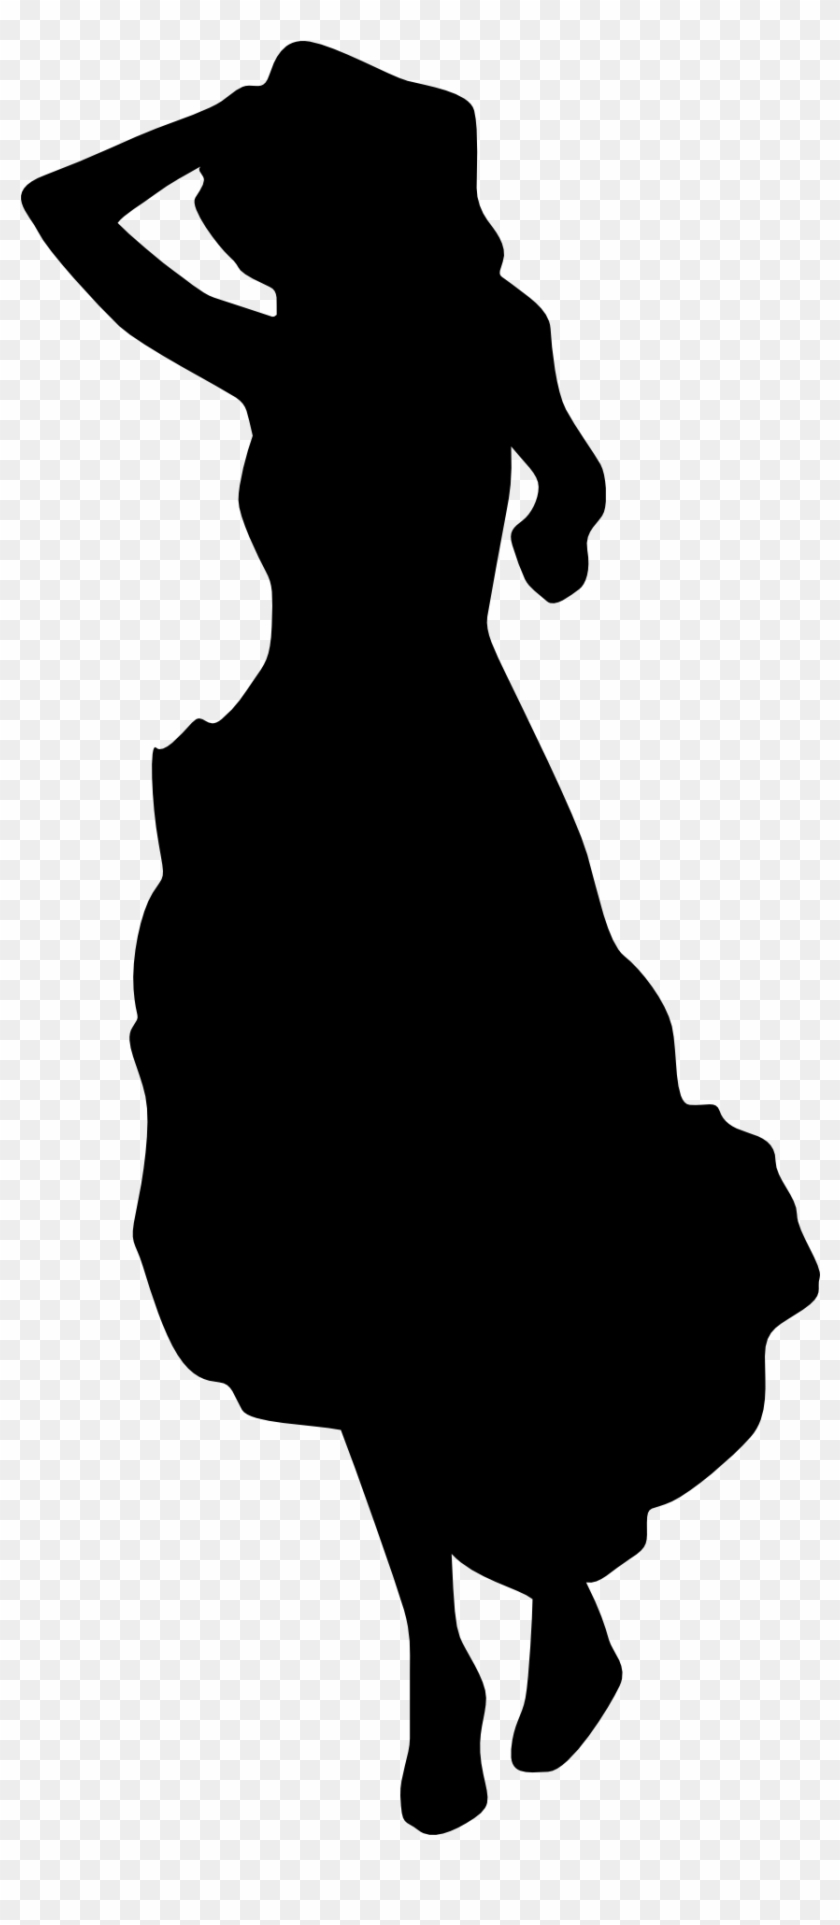 Lady Moving Woman Dress Silhouette Black White Drawing - Dancing Girl Silhouette Clip Art #418921